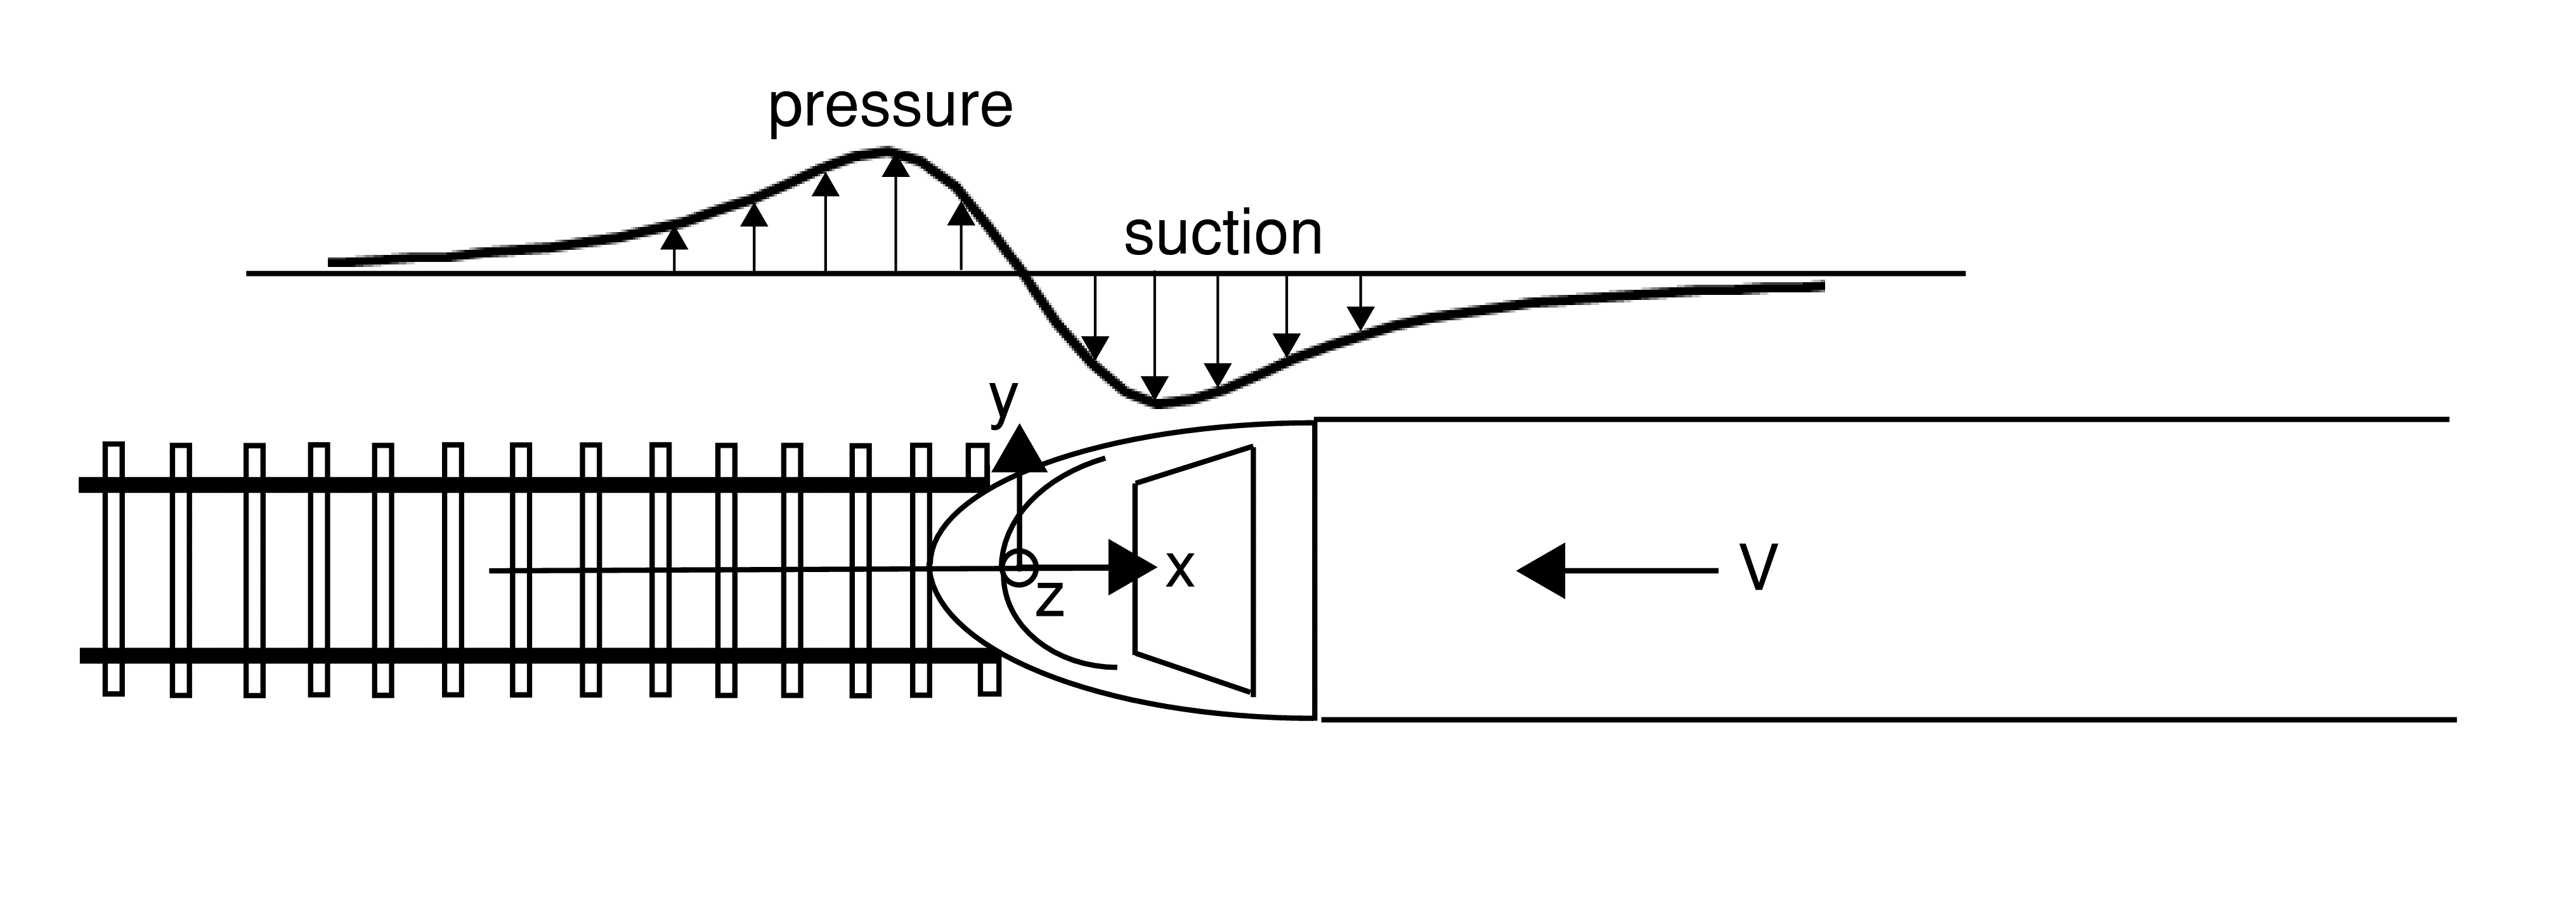 Diagram showing the pressure on a surface near the track as the nose of a train passes